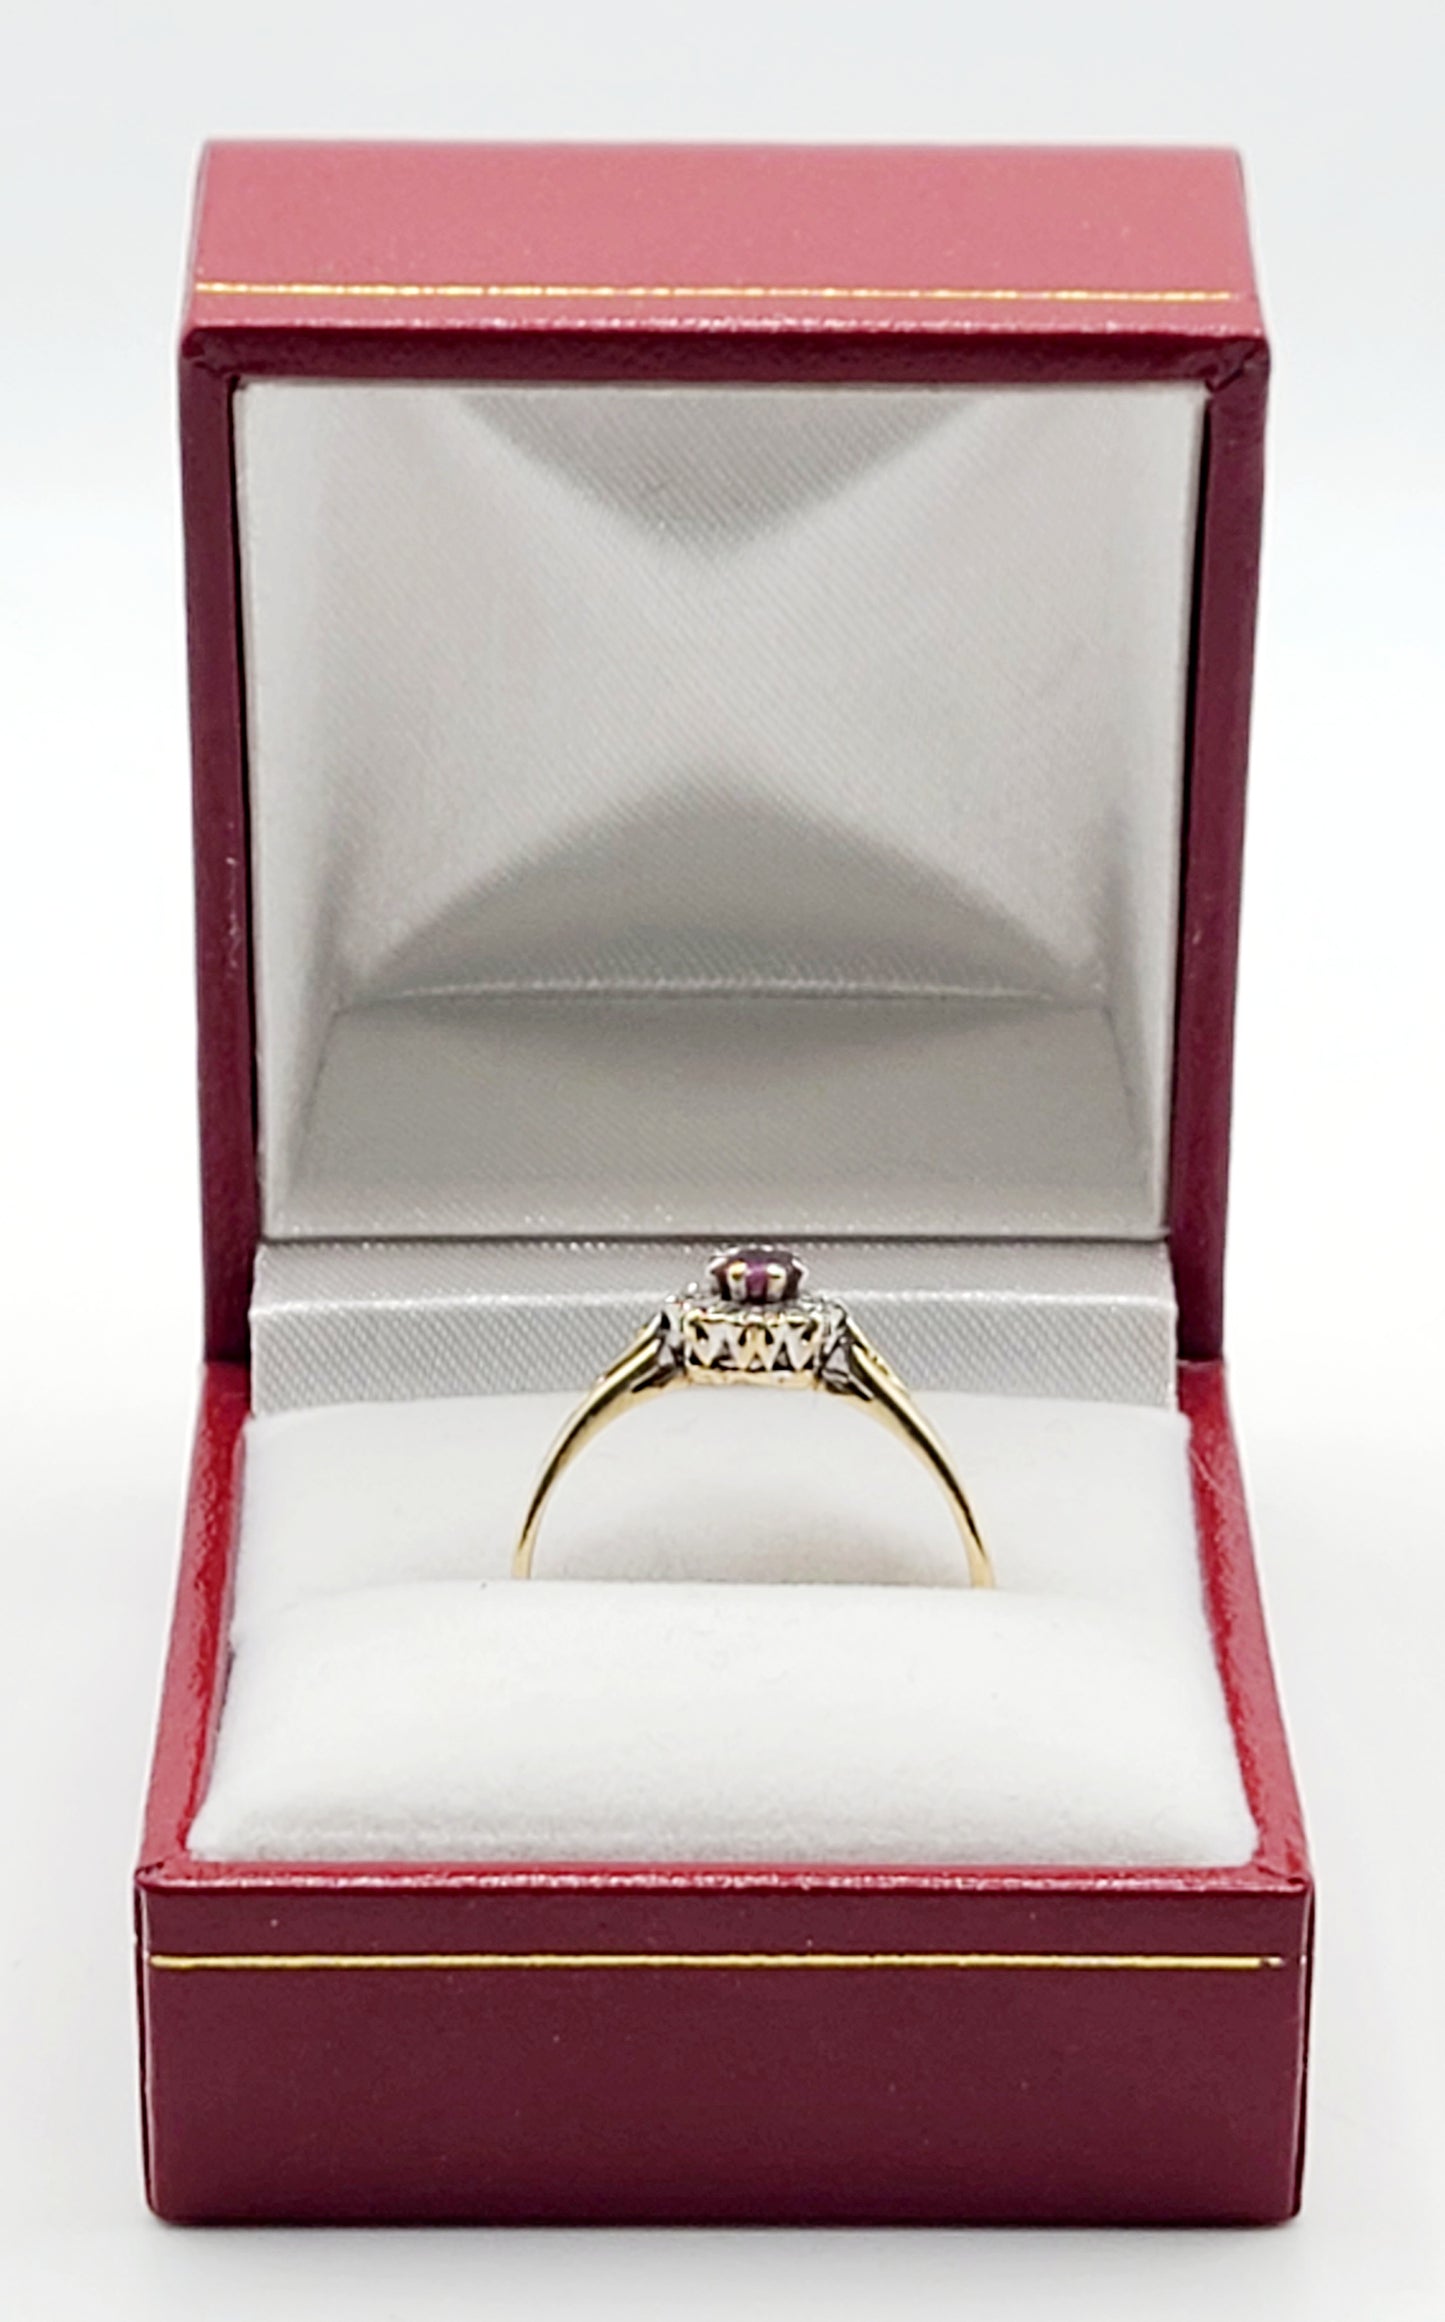 Vintage 1940s Art Deco Ruby with Diamond Halo on 9ct Gold